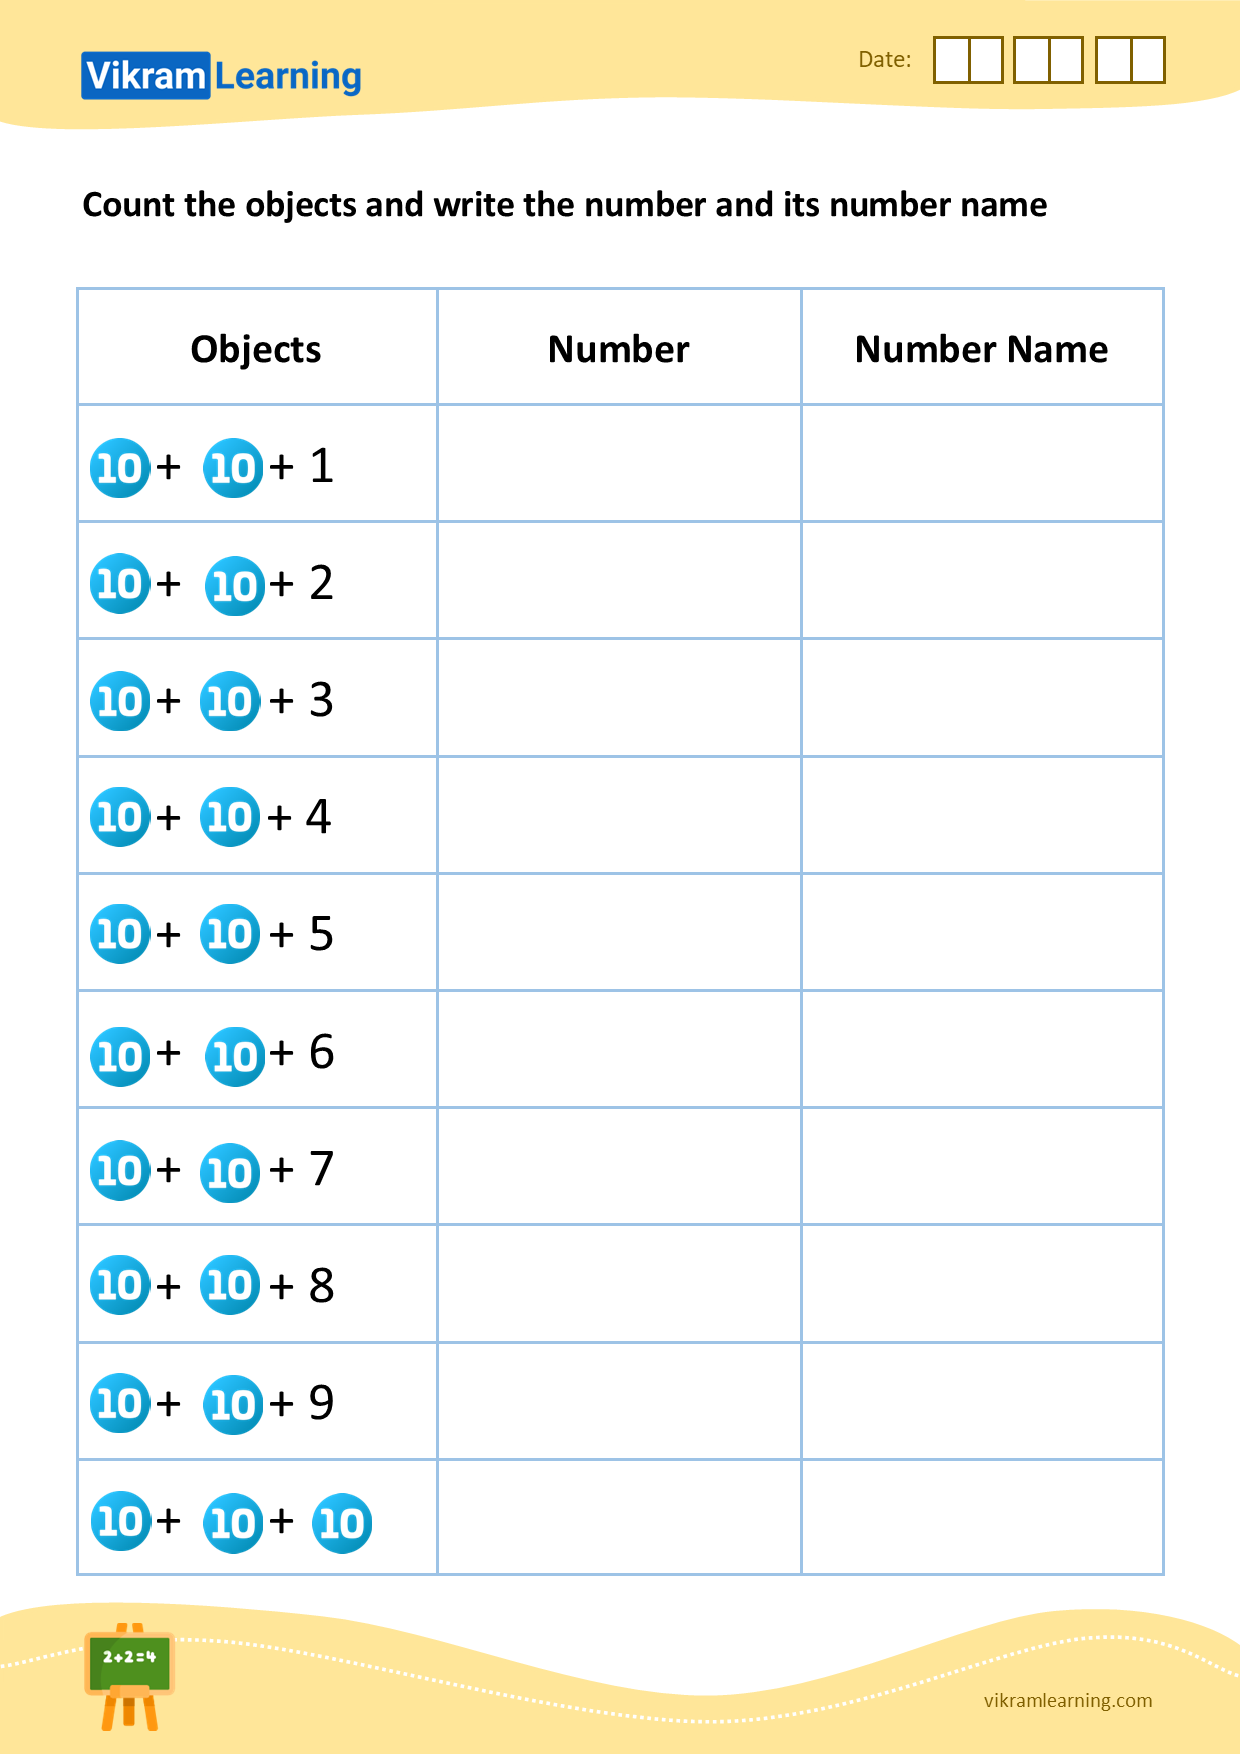 Download count the objects and write the number and its number name (21 to 30) - pattern 1 worksheets